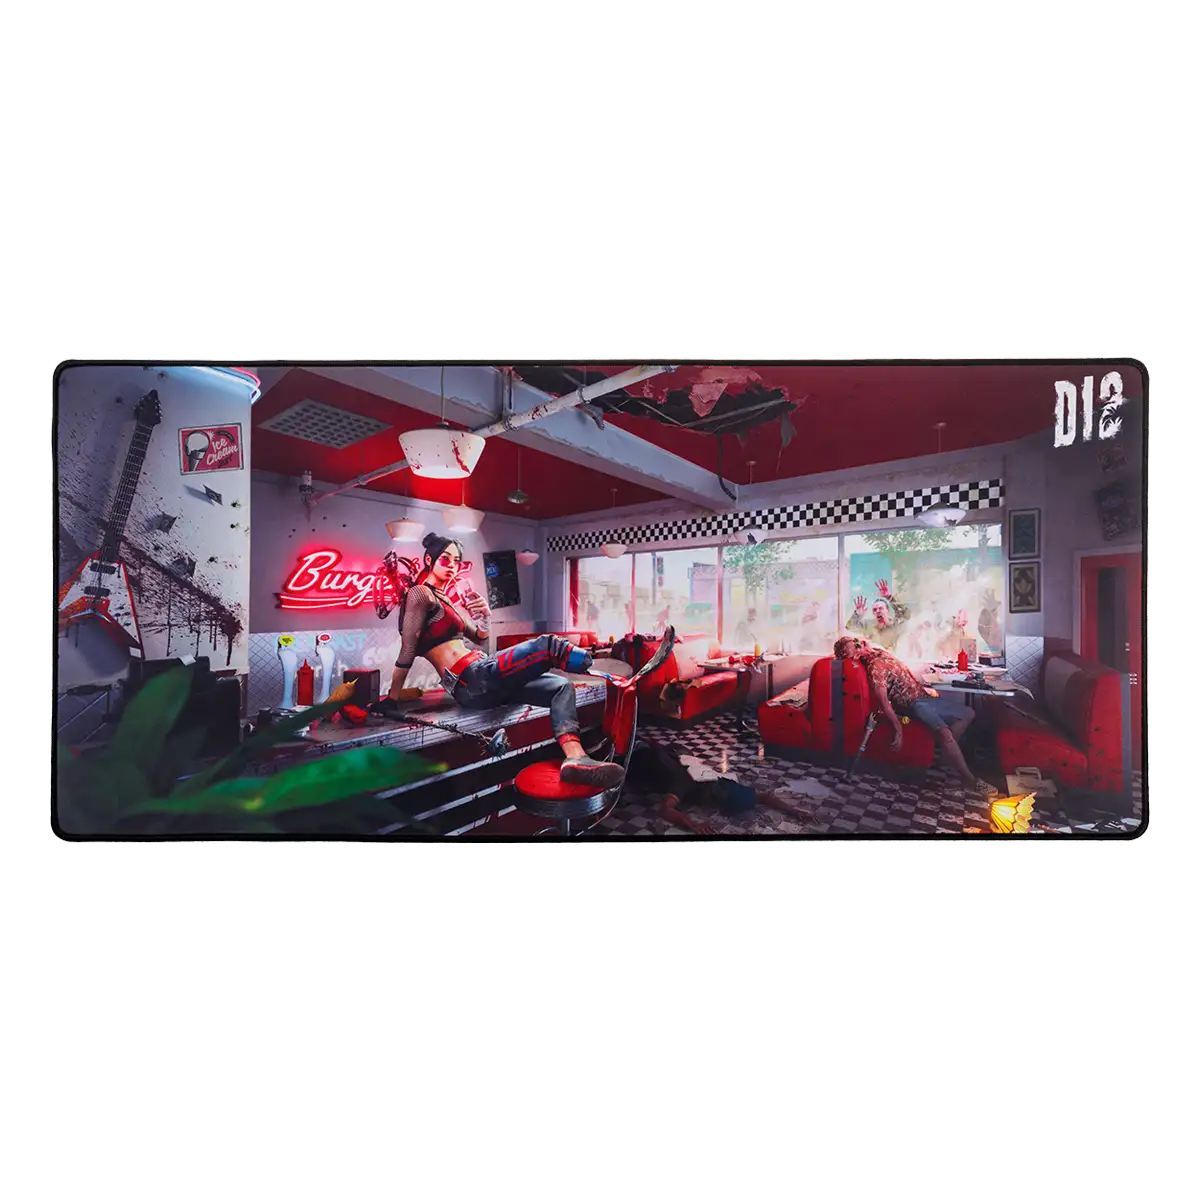 Dead Island 2 Mousemat "Amy" Cover